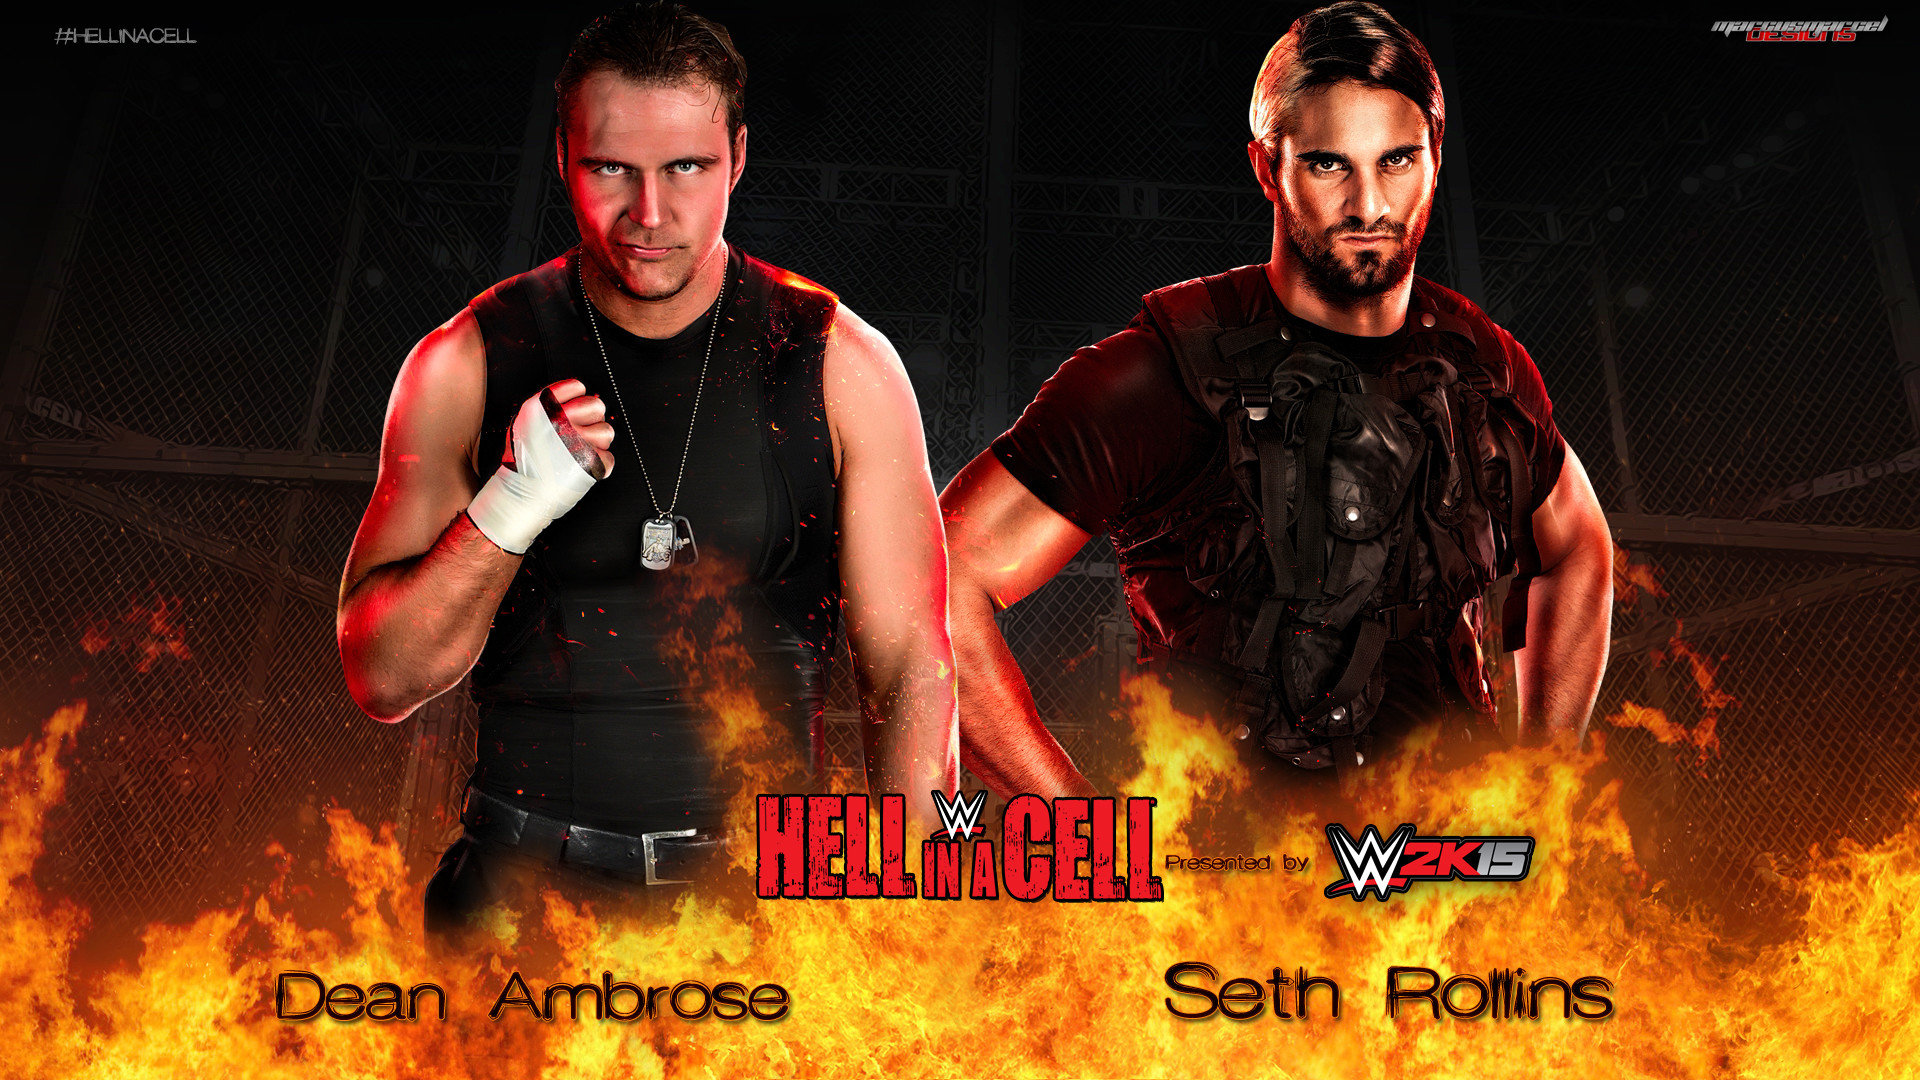 1920x1080 Seth Rollins by MarcusMarcel Hell In A Cell - Dean Ambrose vs. Seth Rollins  by MarcusMarcel